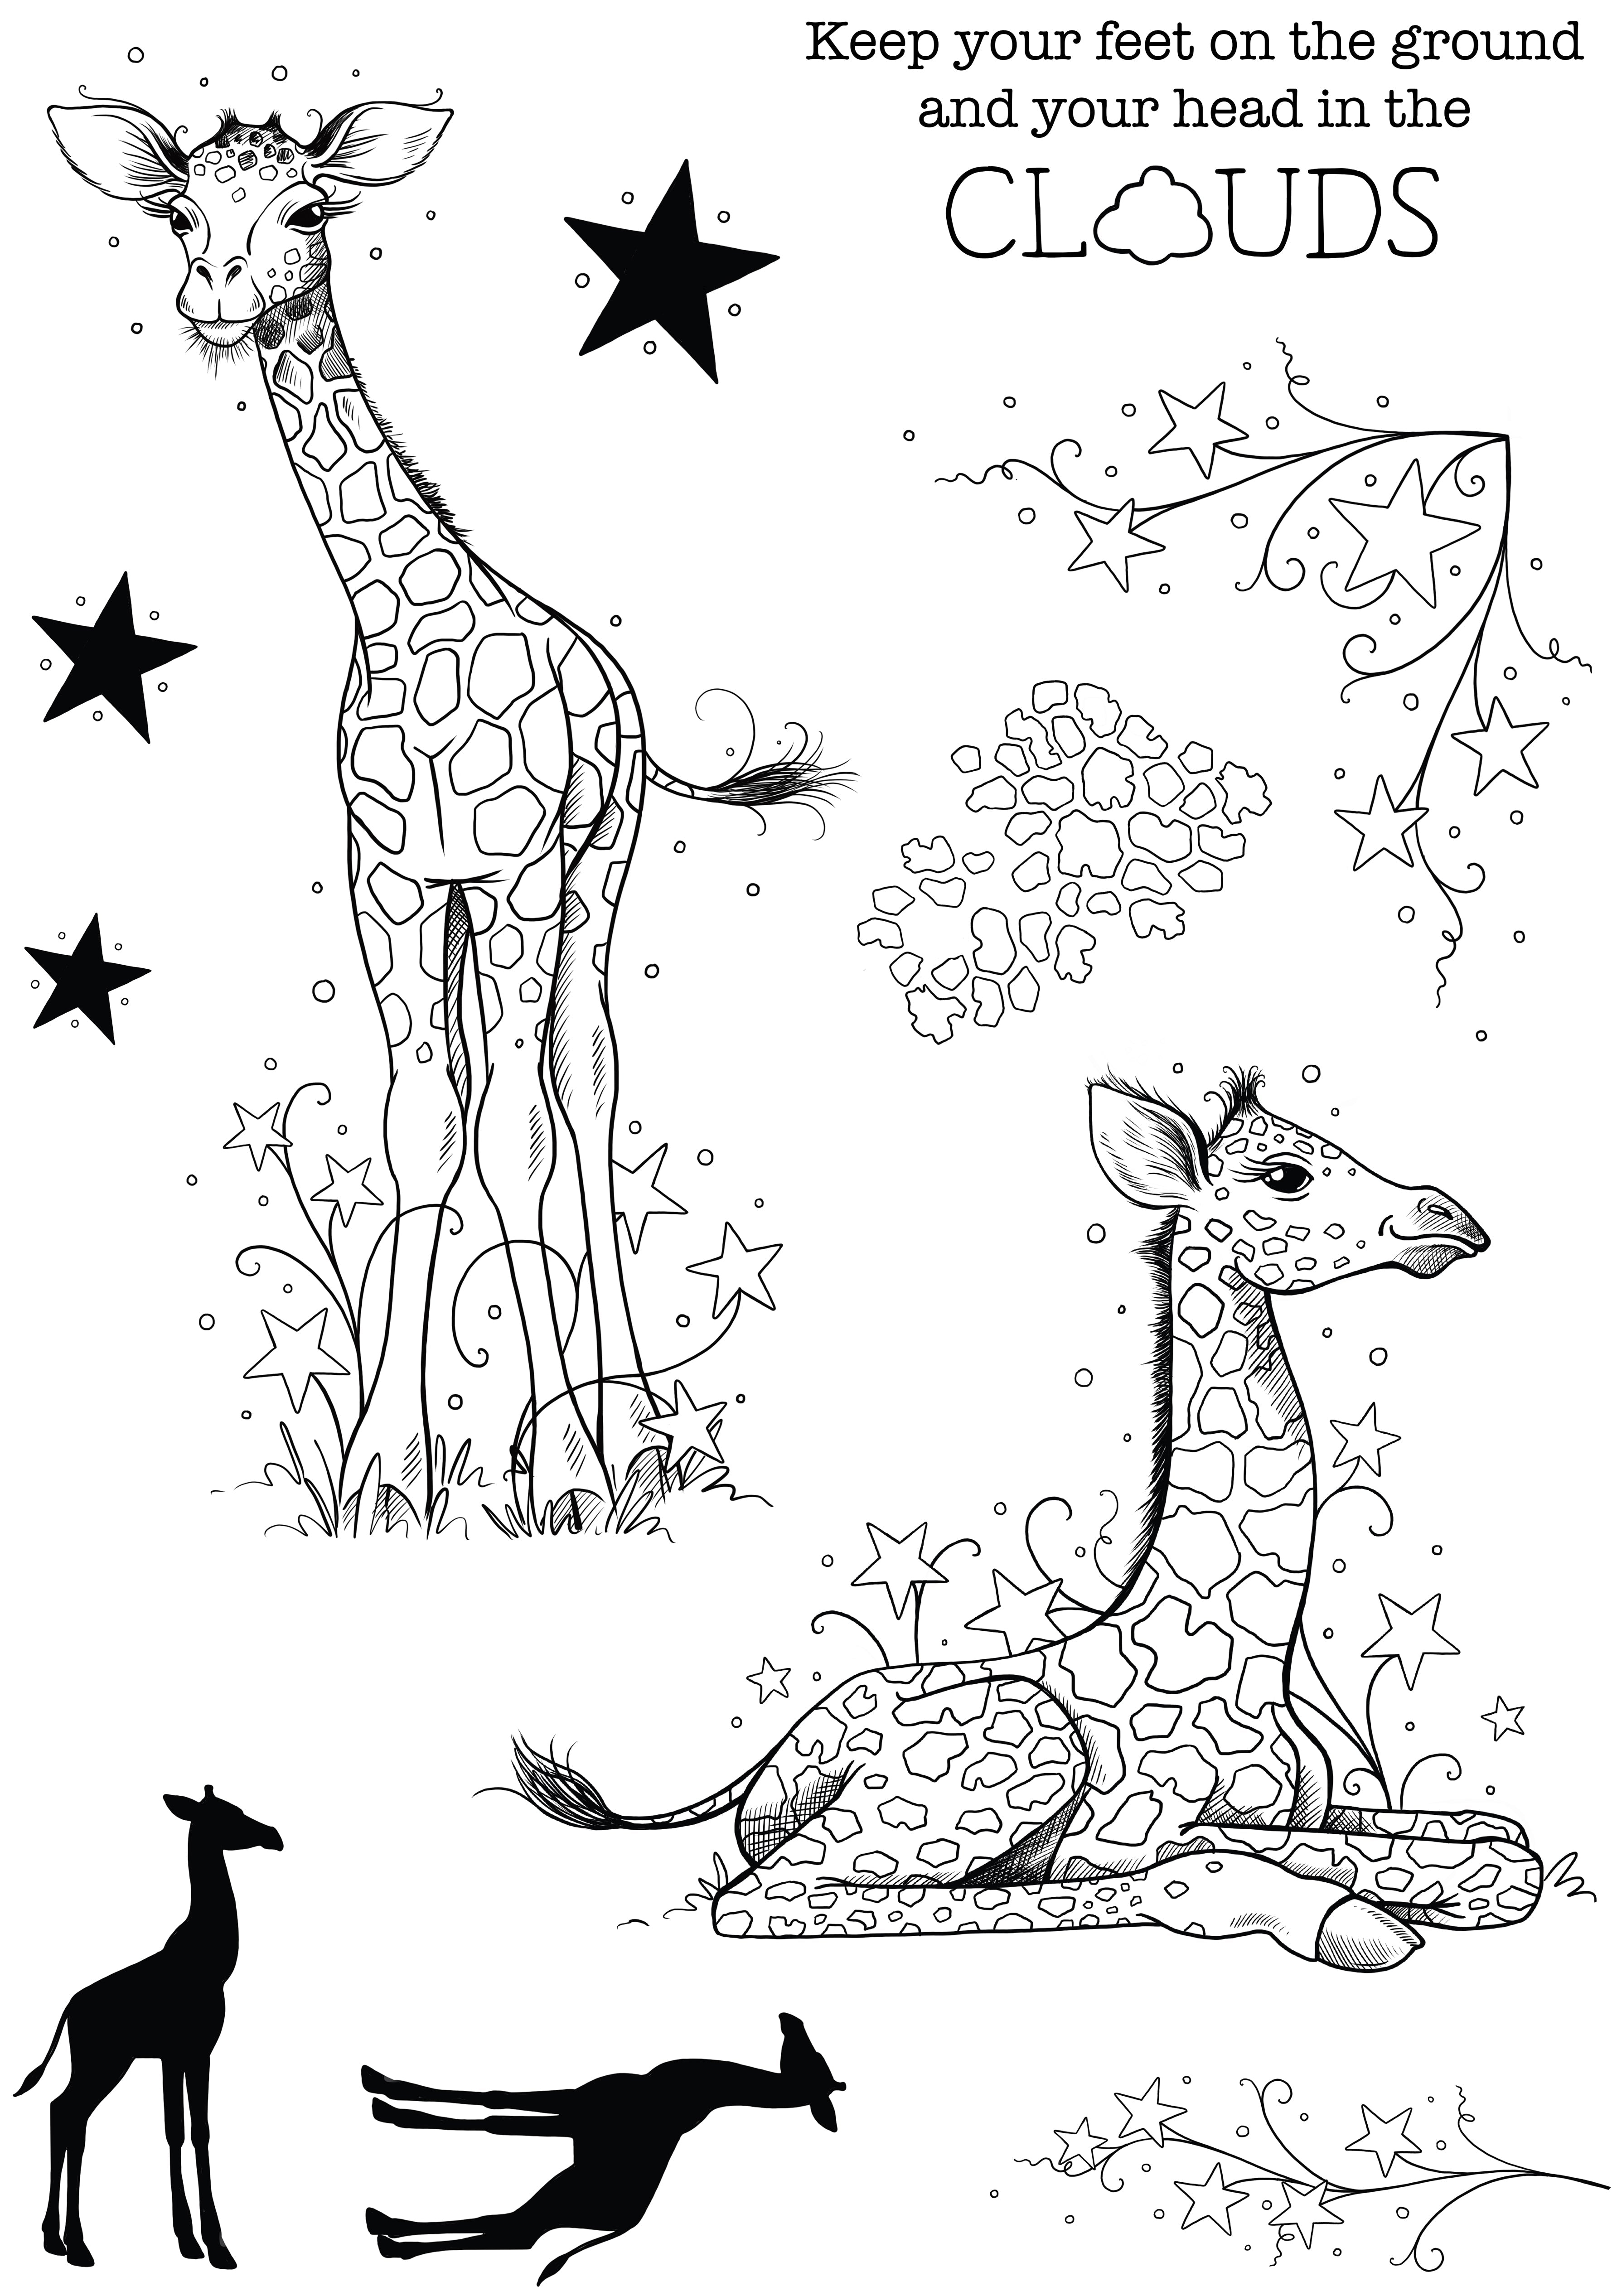 Pink Ink Designs Baby Giraffe 6 in x 8 in Clear Stamp Set